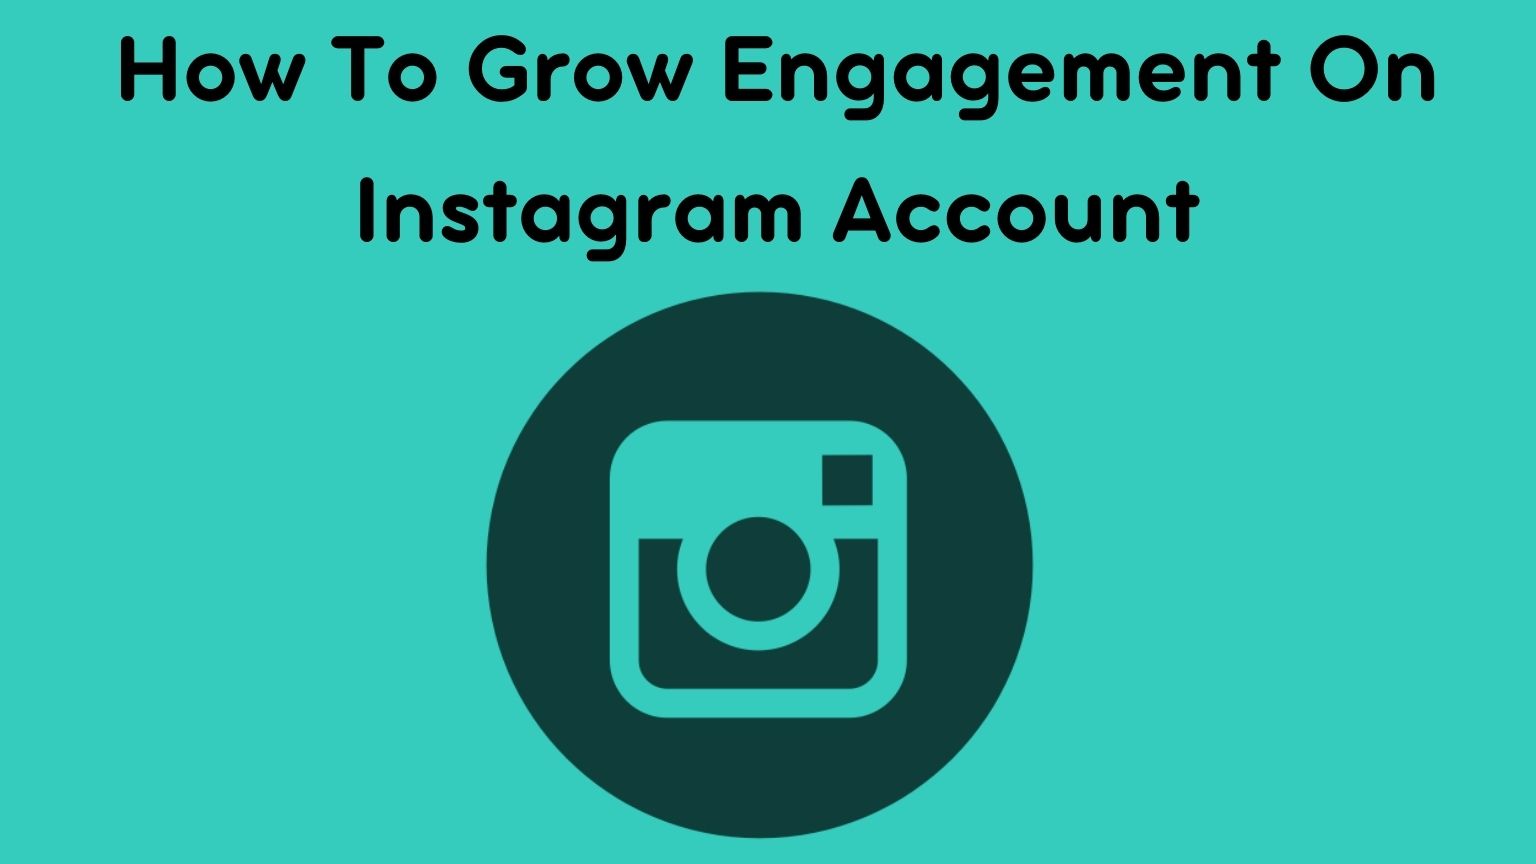 How To Grow Engagement On Instagram Account